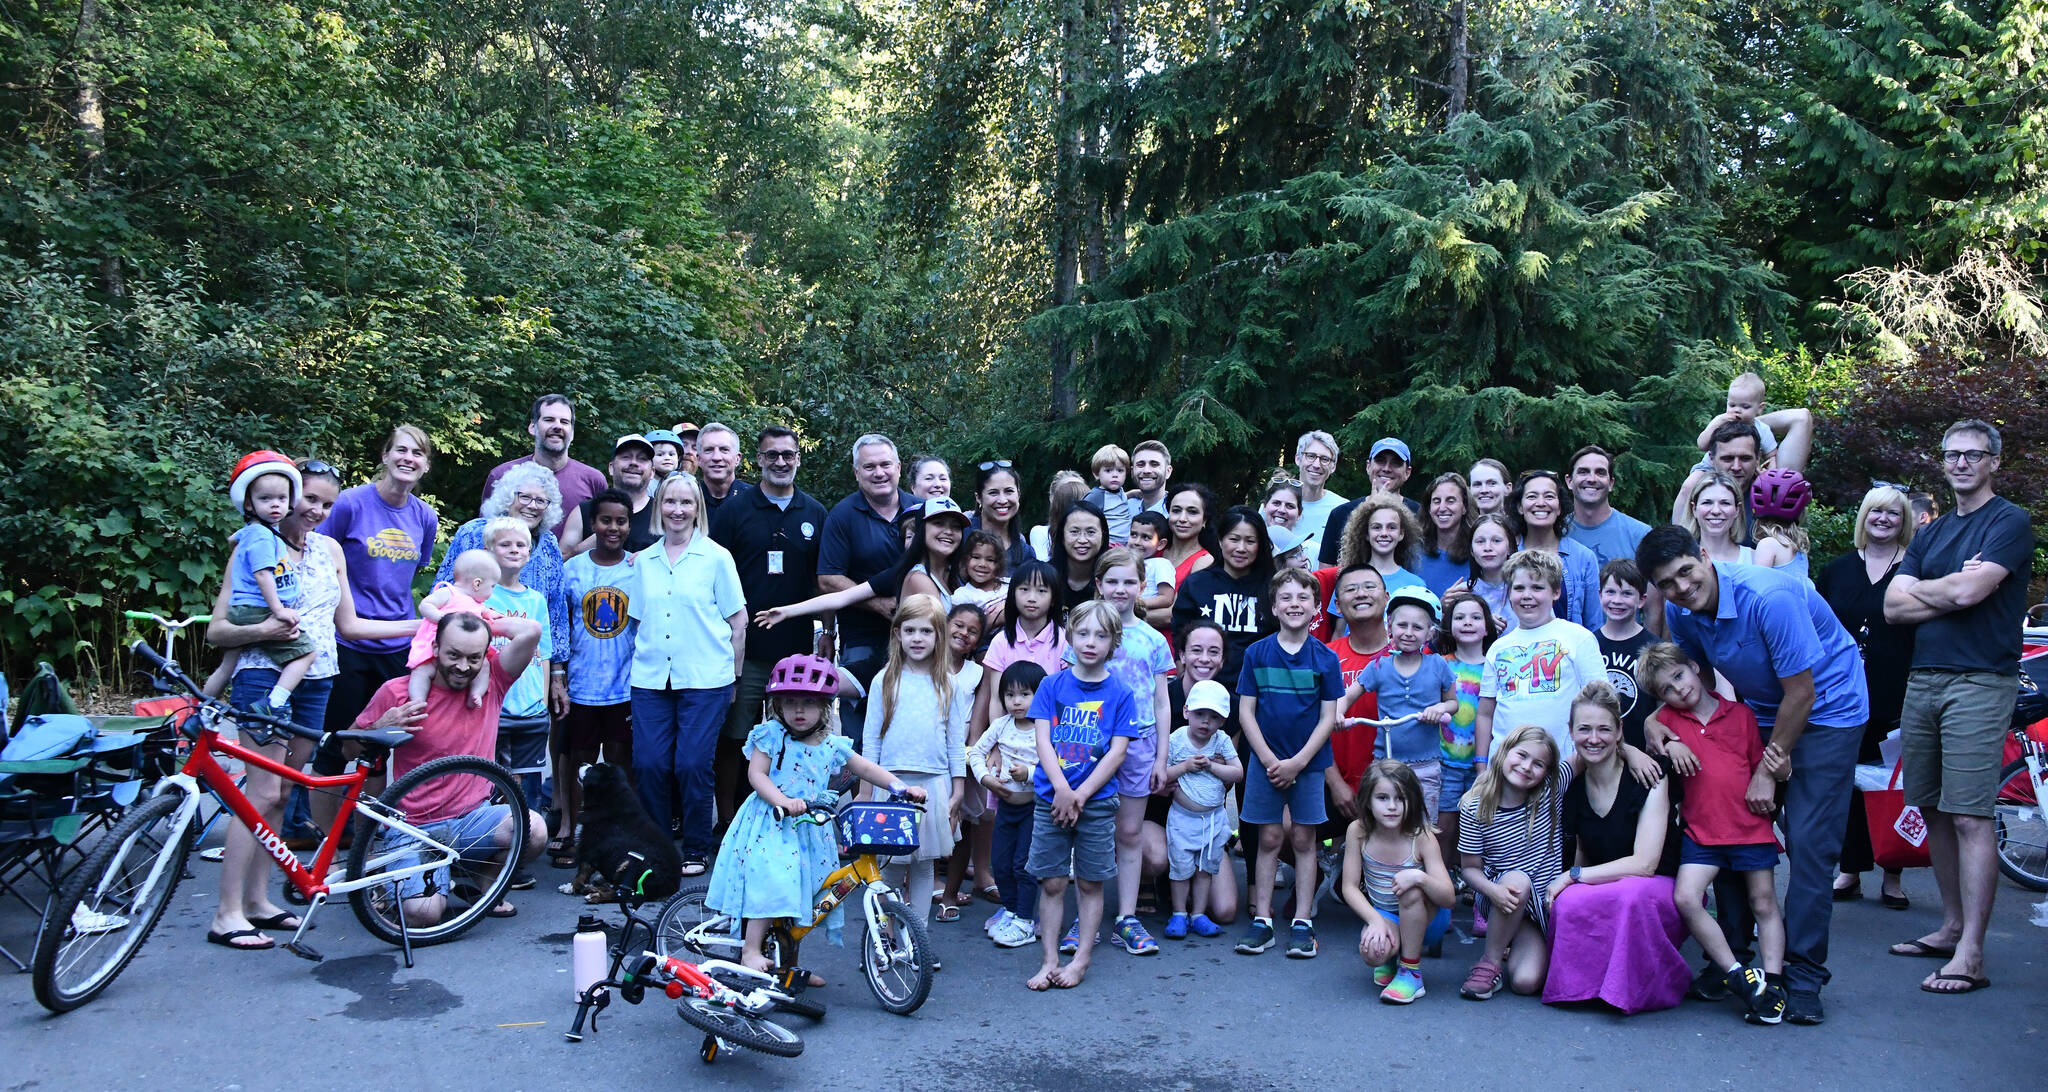 Mercer Islanders gather in the Ellis Pond neighborhood along with Mayor Salim Nice, Mercer Island Police Department Chief Ed Holmes and the city’s emergency management leader Amanda Keverkamp at a National Night Out gathering on Aug. 1. Islander Jordan Naftolin organized this robust event in his area. The national campaign promotes police-community partnerships and focuses on crime prevention and resident connectedness. Story to come. Andy Nystrom/ staff photo